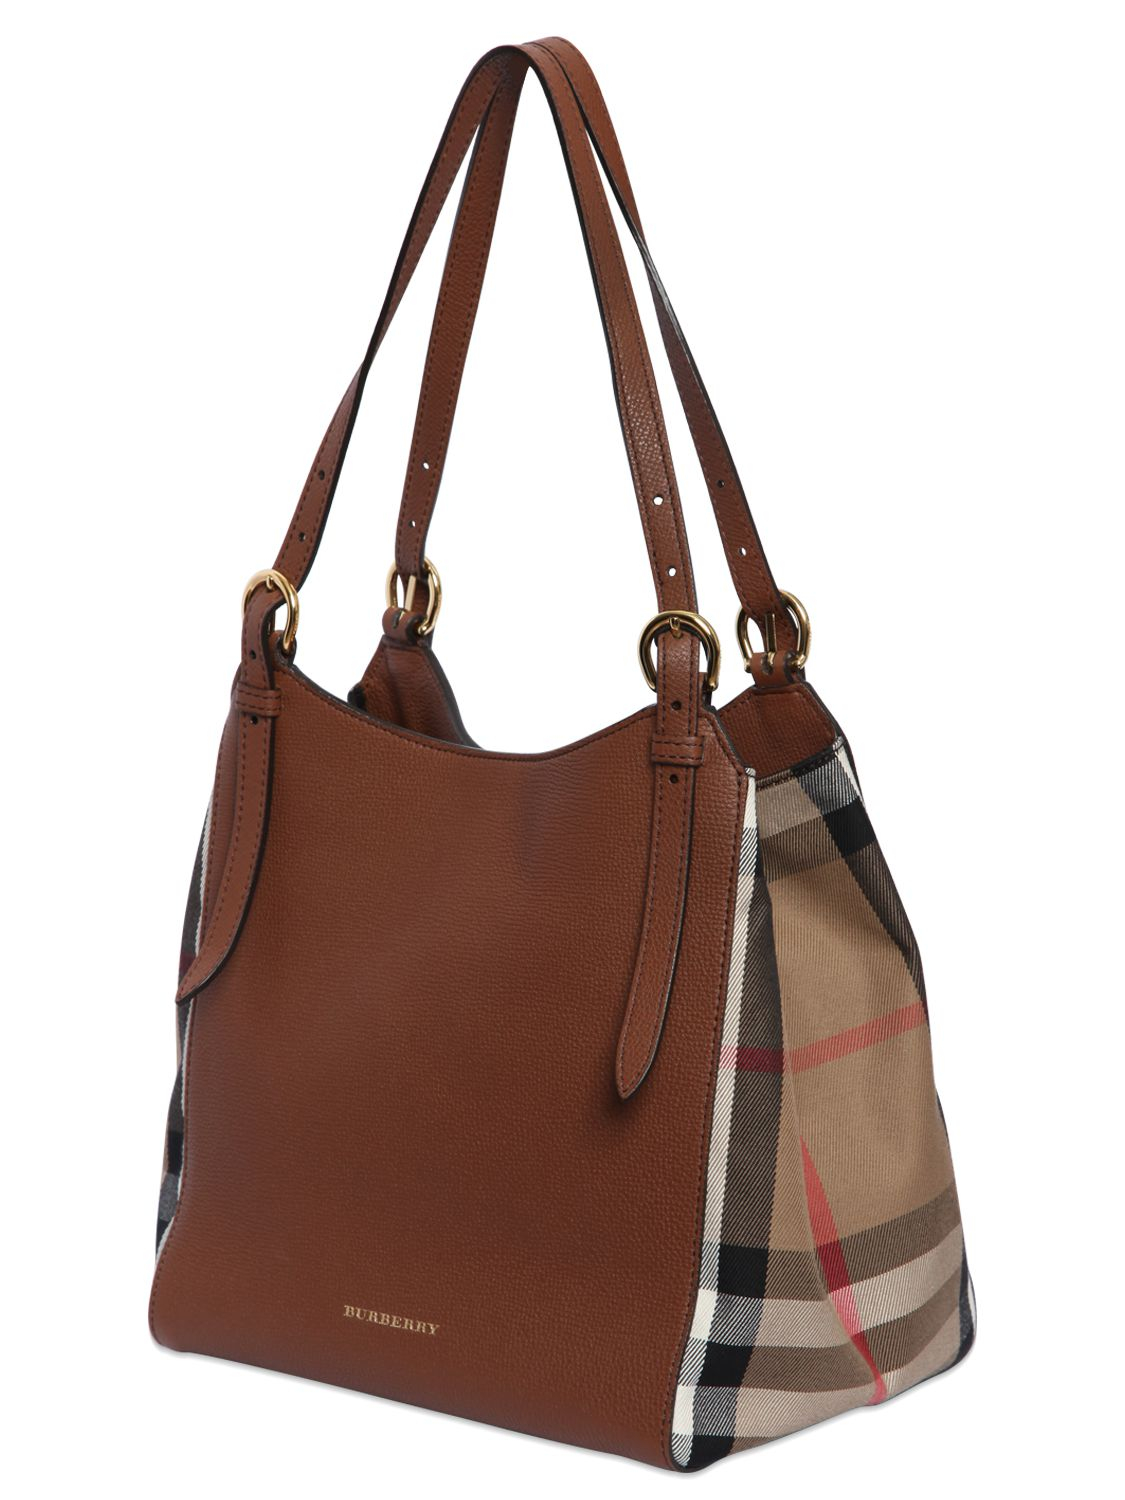 Lyst - Burberry Small Canterbury Check & Leather Bag in Brown